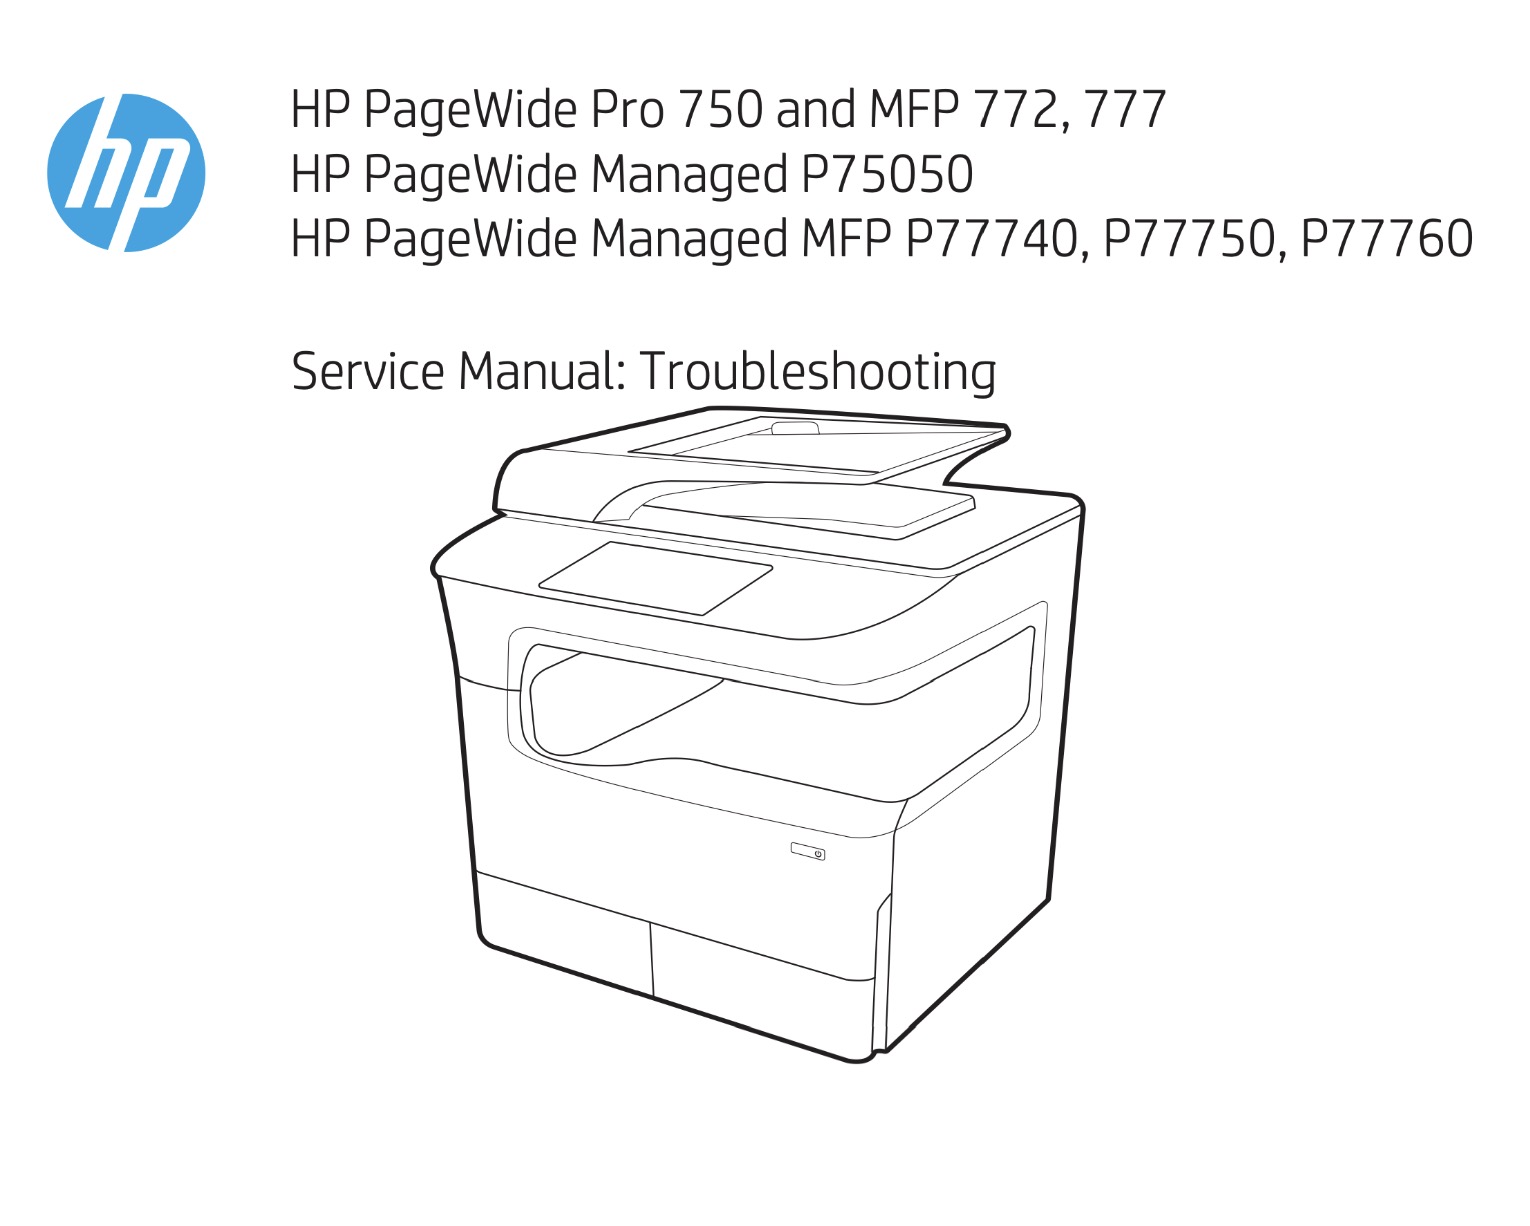 HP PageWide Pro 750, MFP 772, 777, Managed P75050,  MFP P77740, P77750, P77760 Service Troubleshooting Manual,  Parts List and Diagrams